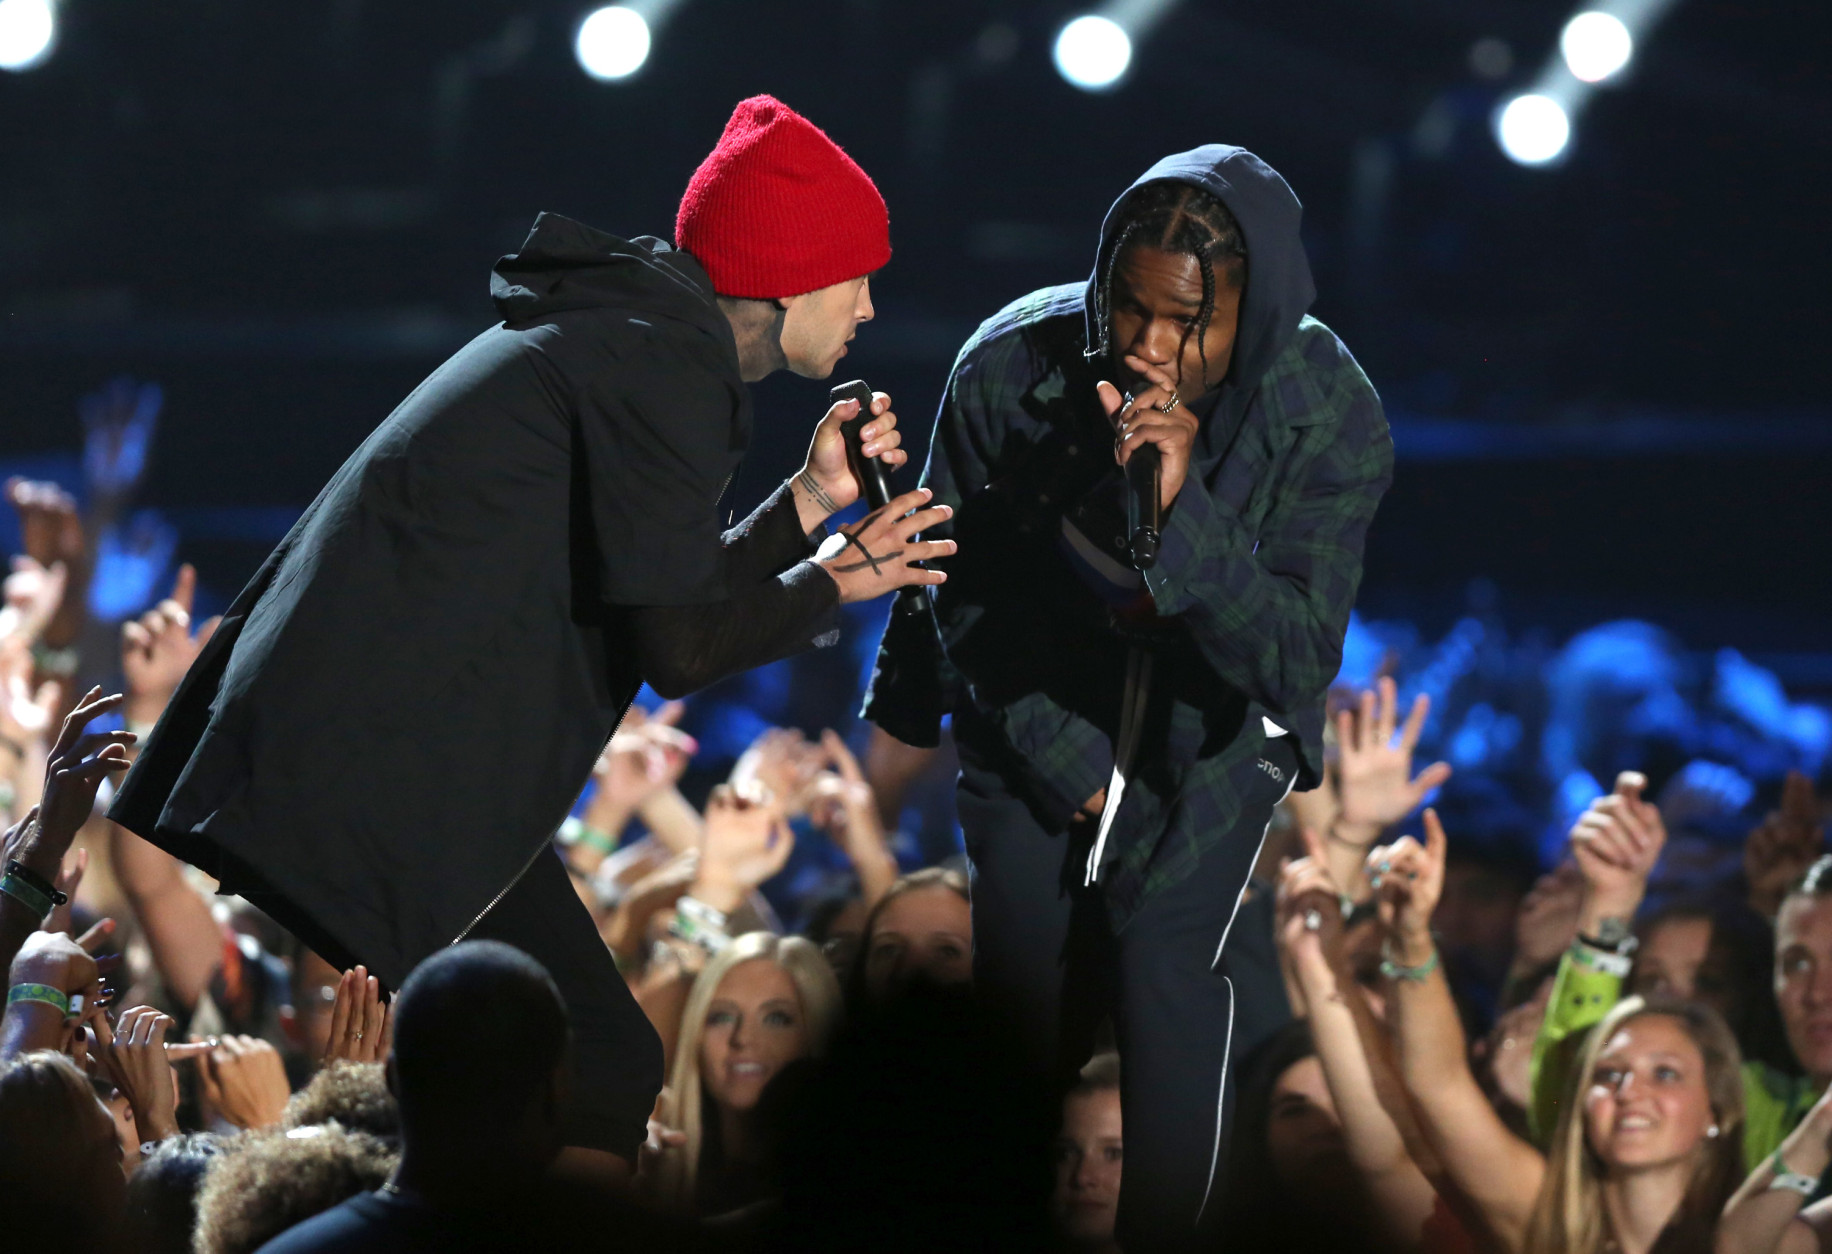 Tyler Joseph of 21 Pilots, left, and A$AP Rocky perform at the MTV Video Music Awards at the Microsoft Theater on Sunday, Aug. 30, 2015, in Los Angeles. (Photo by Matt Sayles/Invision/AP)